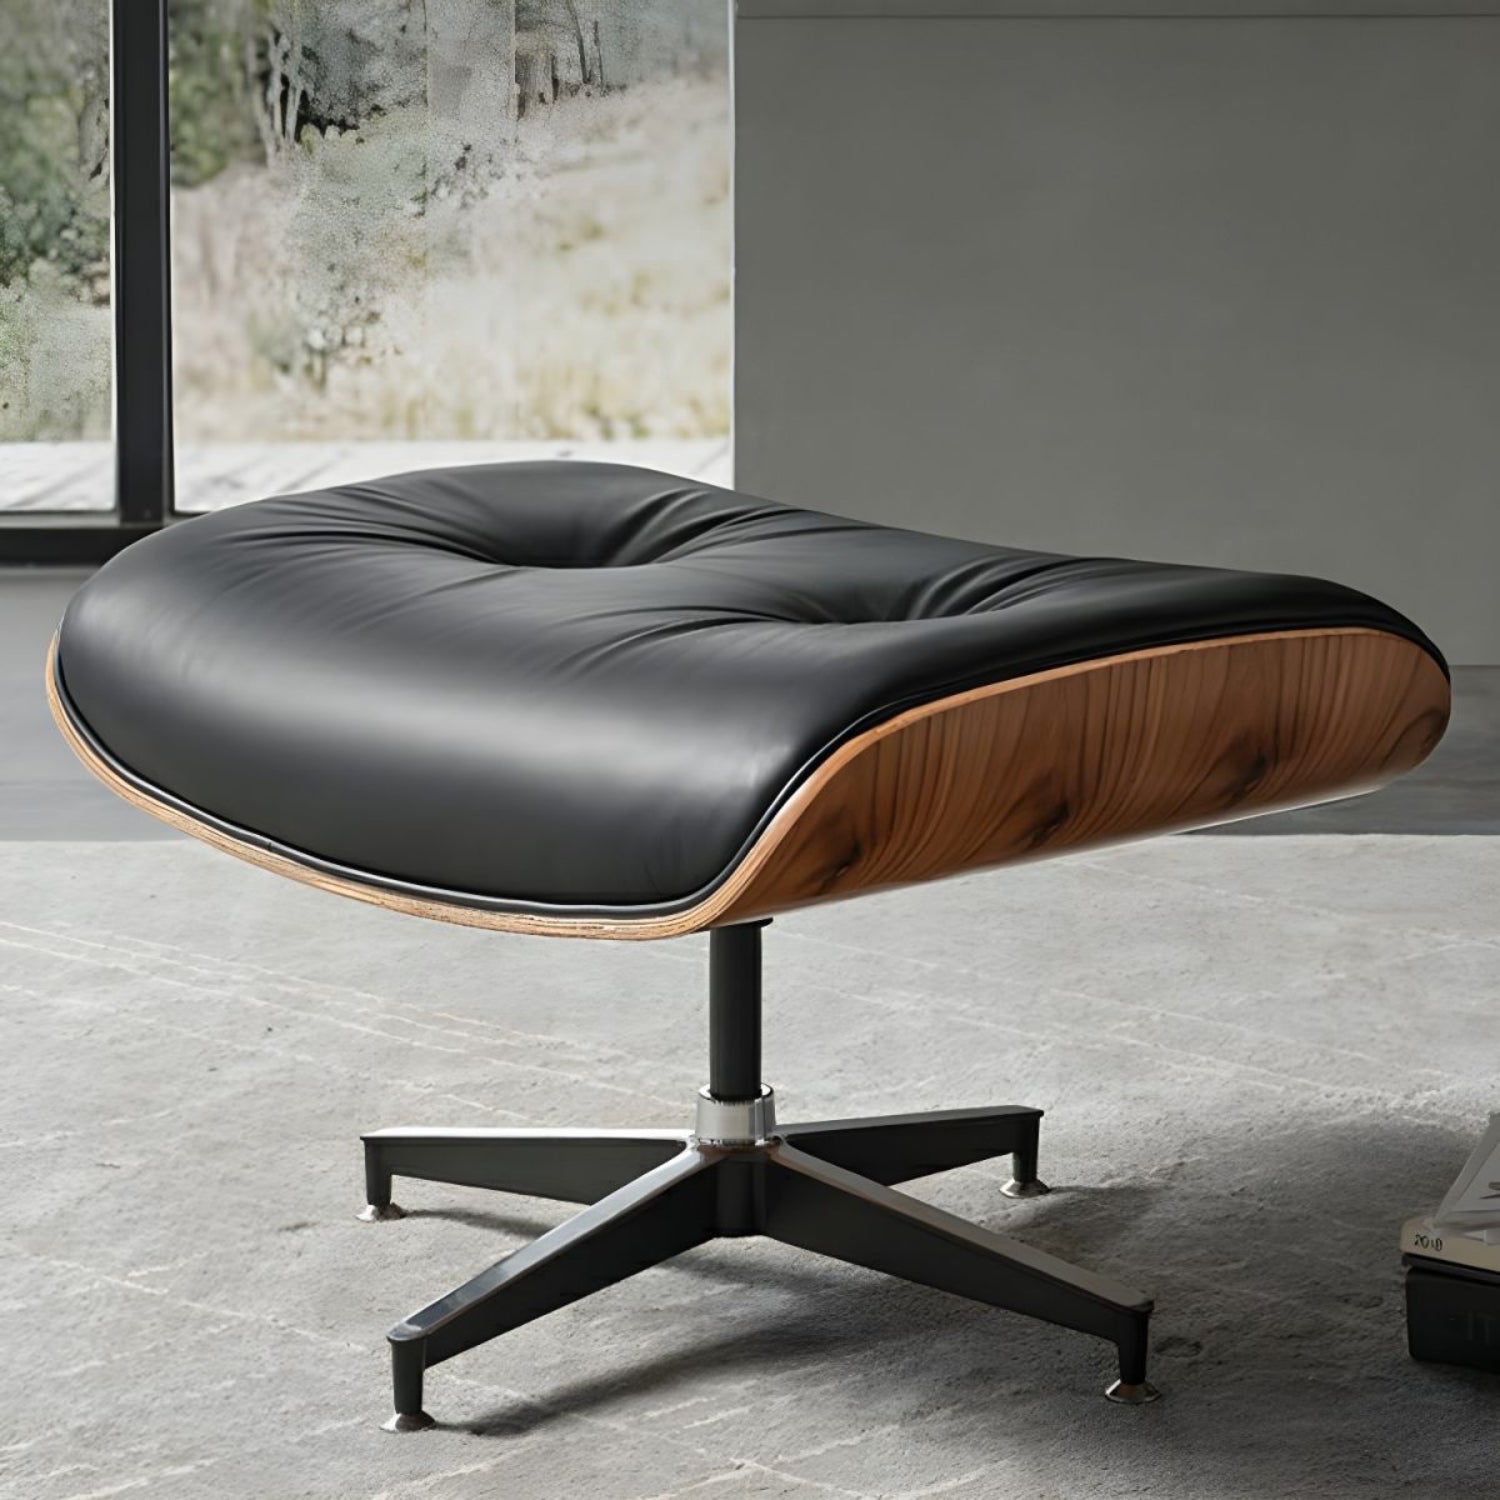 A stylish Eames ottoman featuring a black leather seat and elegant wooden legs, perfect for adding sophistication to any room.